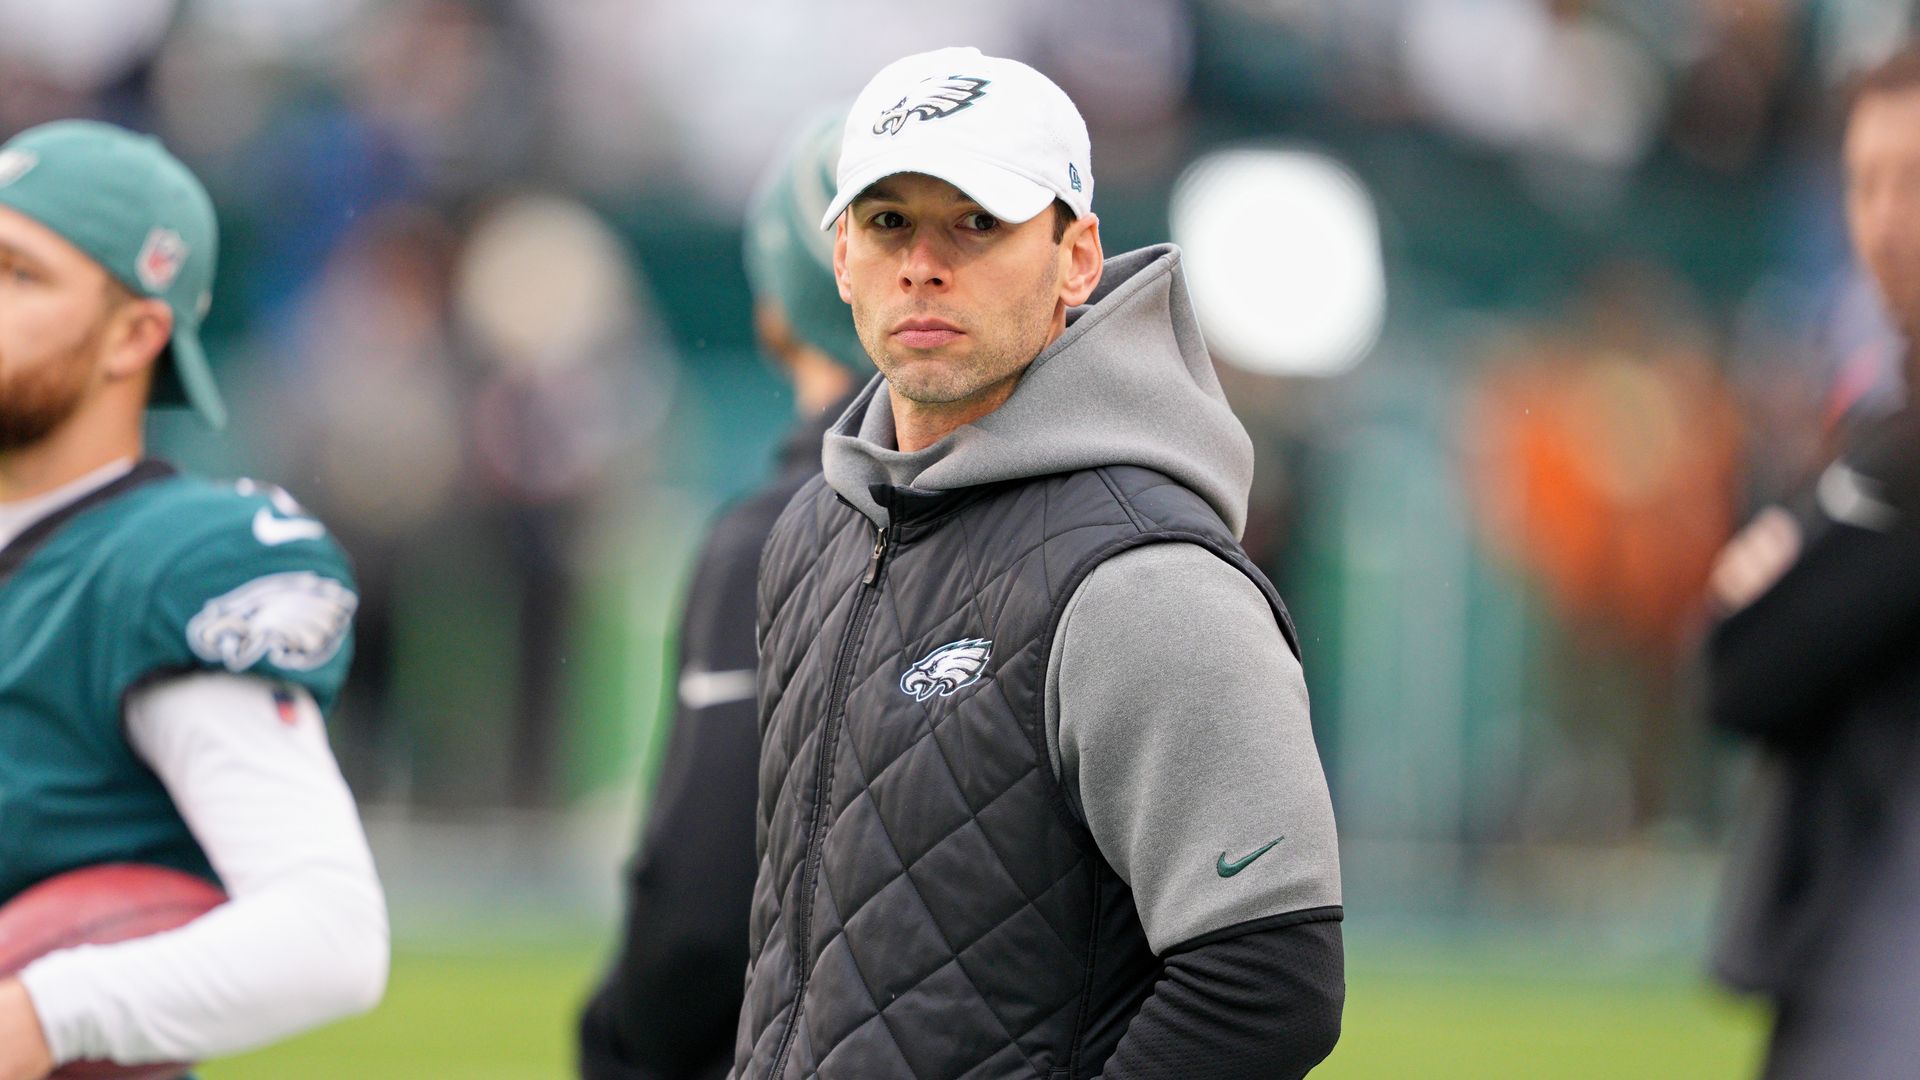 Jonathan Gannon stands on a football field wearing a white Philadelphia Eagles hat and a black and gray hooded jacket.